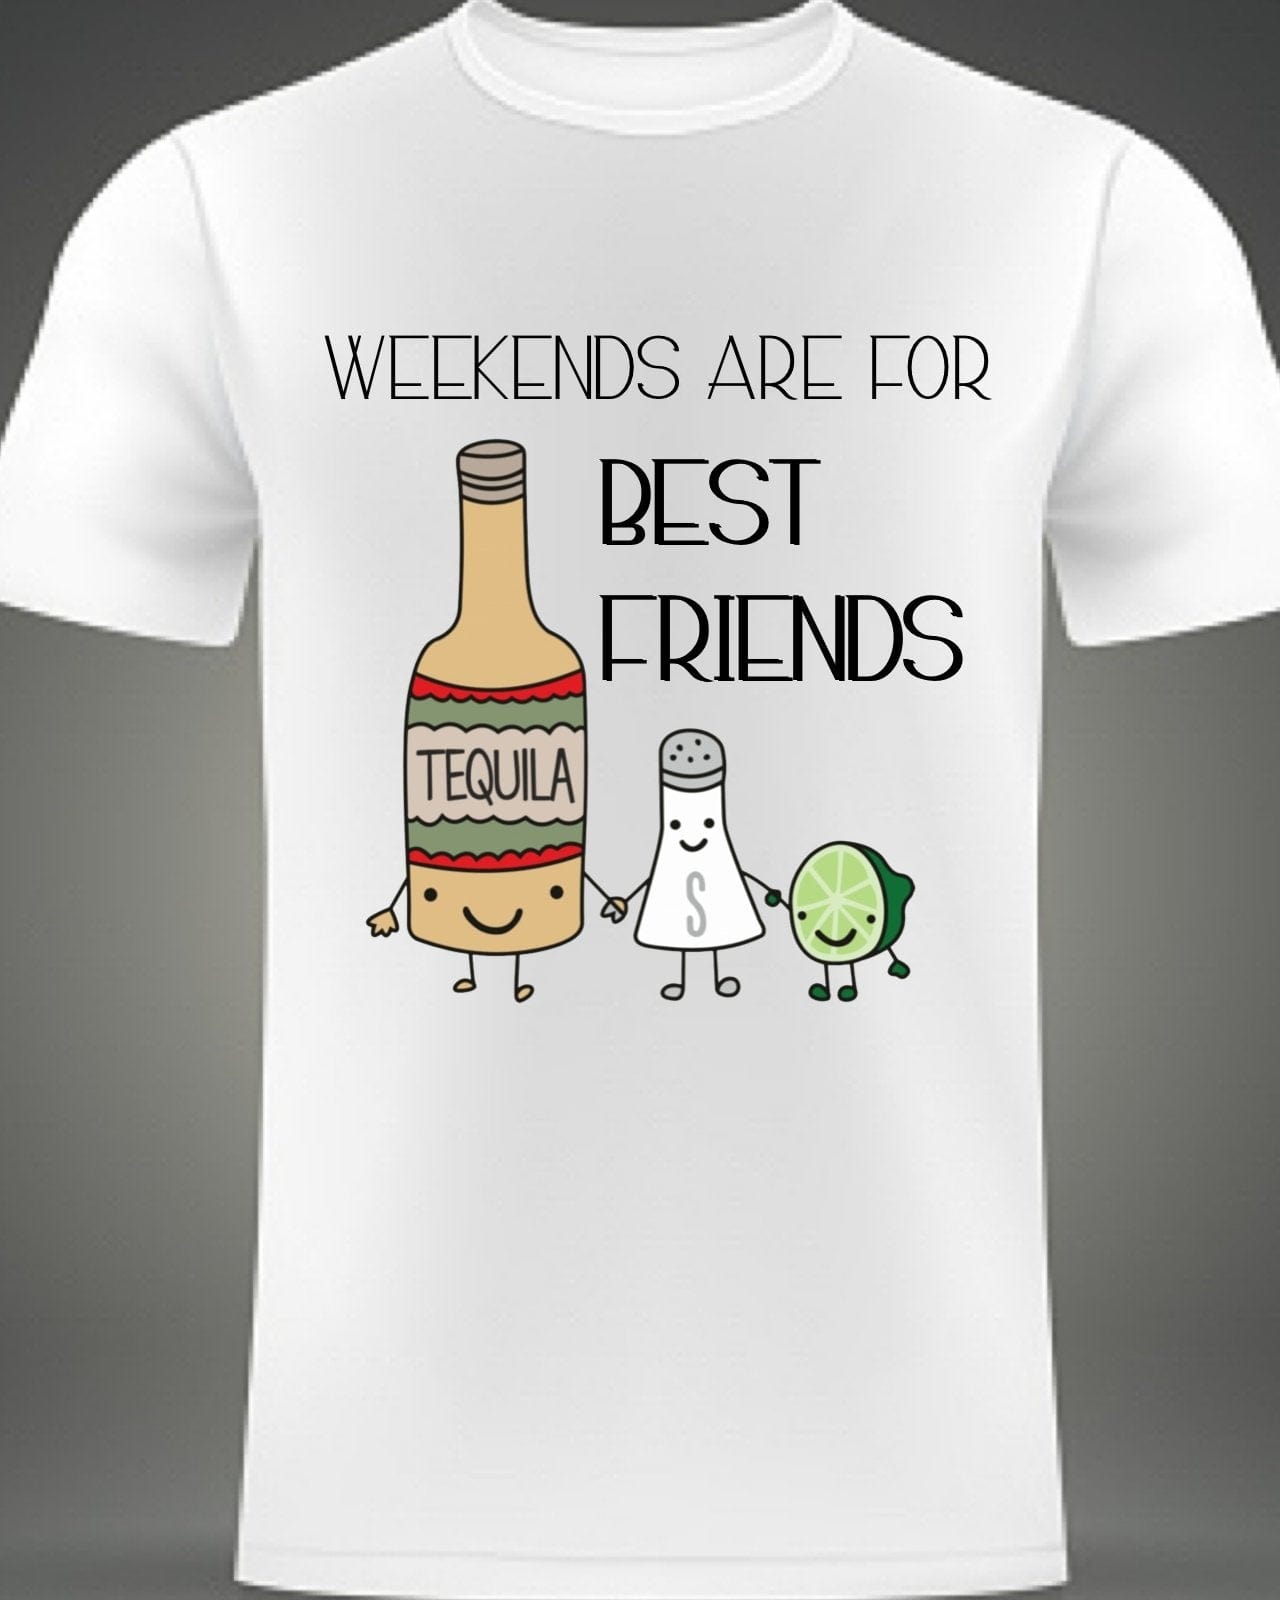 InsensitiviTees Shirts S / White Weekends Are For Best Friends